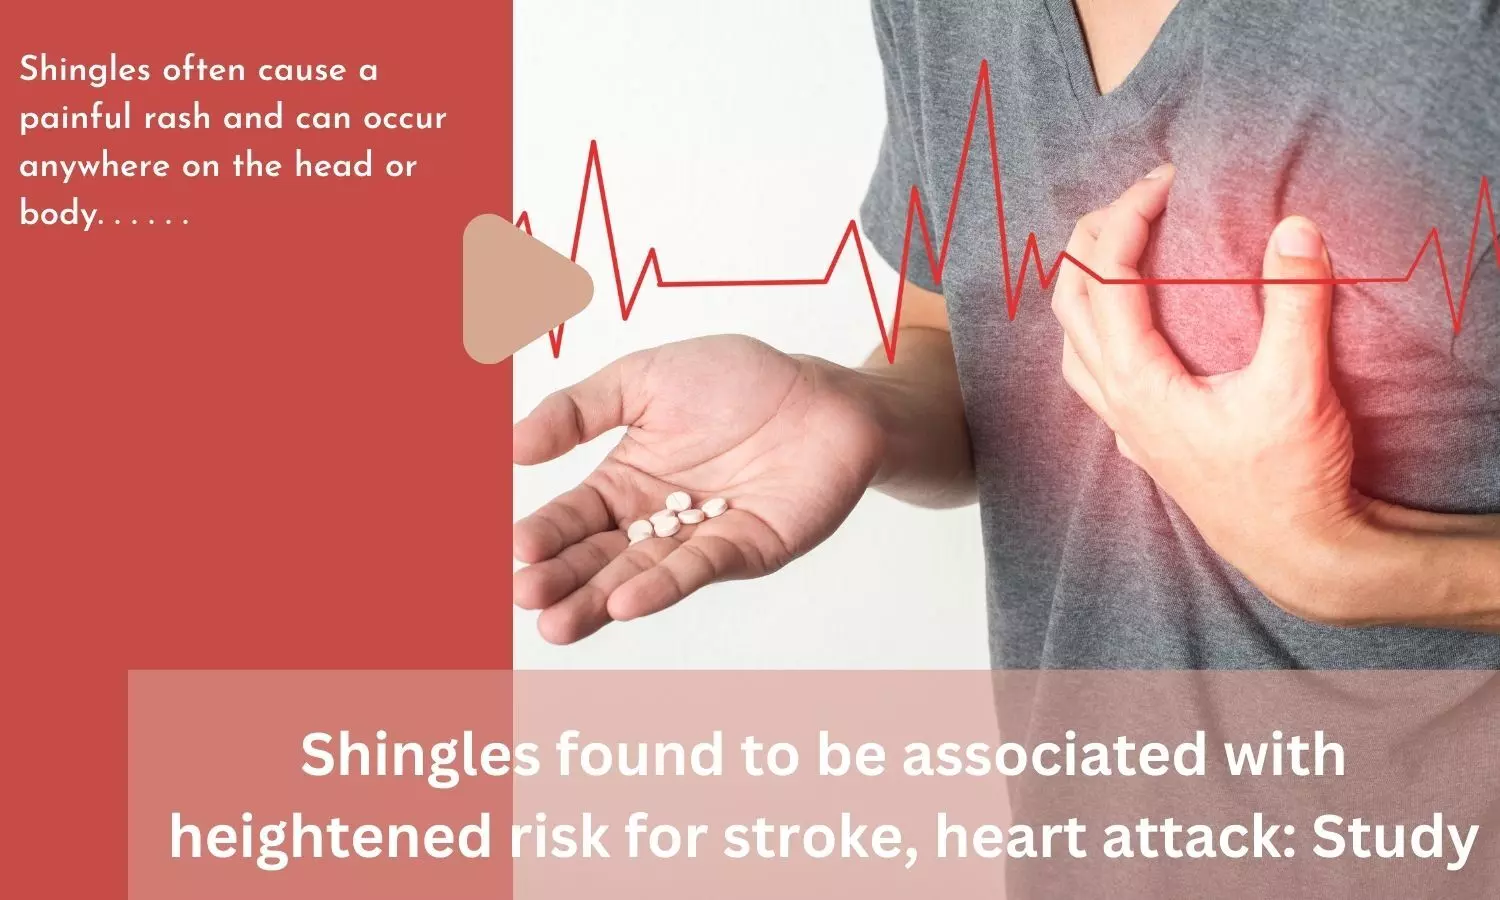 Shingles found to be associated with heightened risk for stroke, heart attack: Study